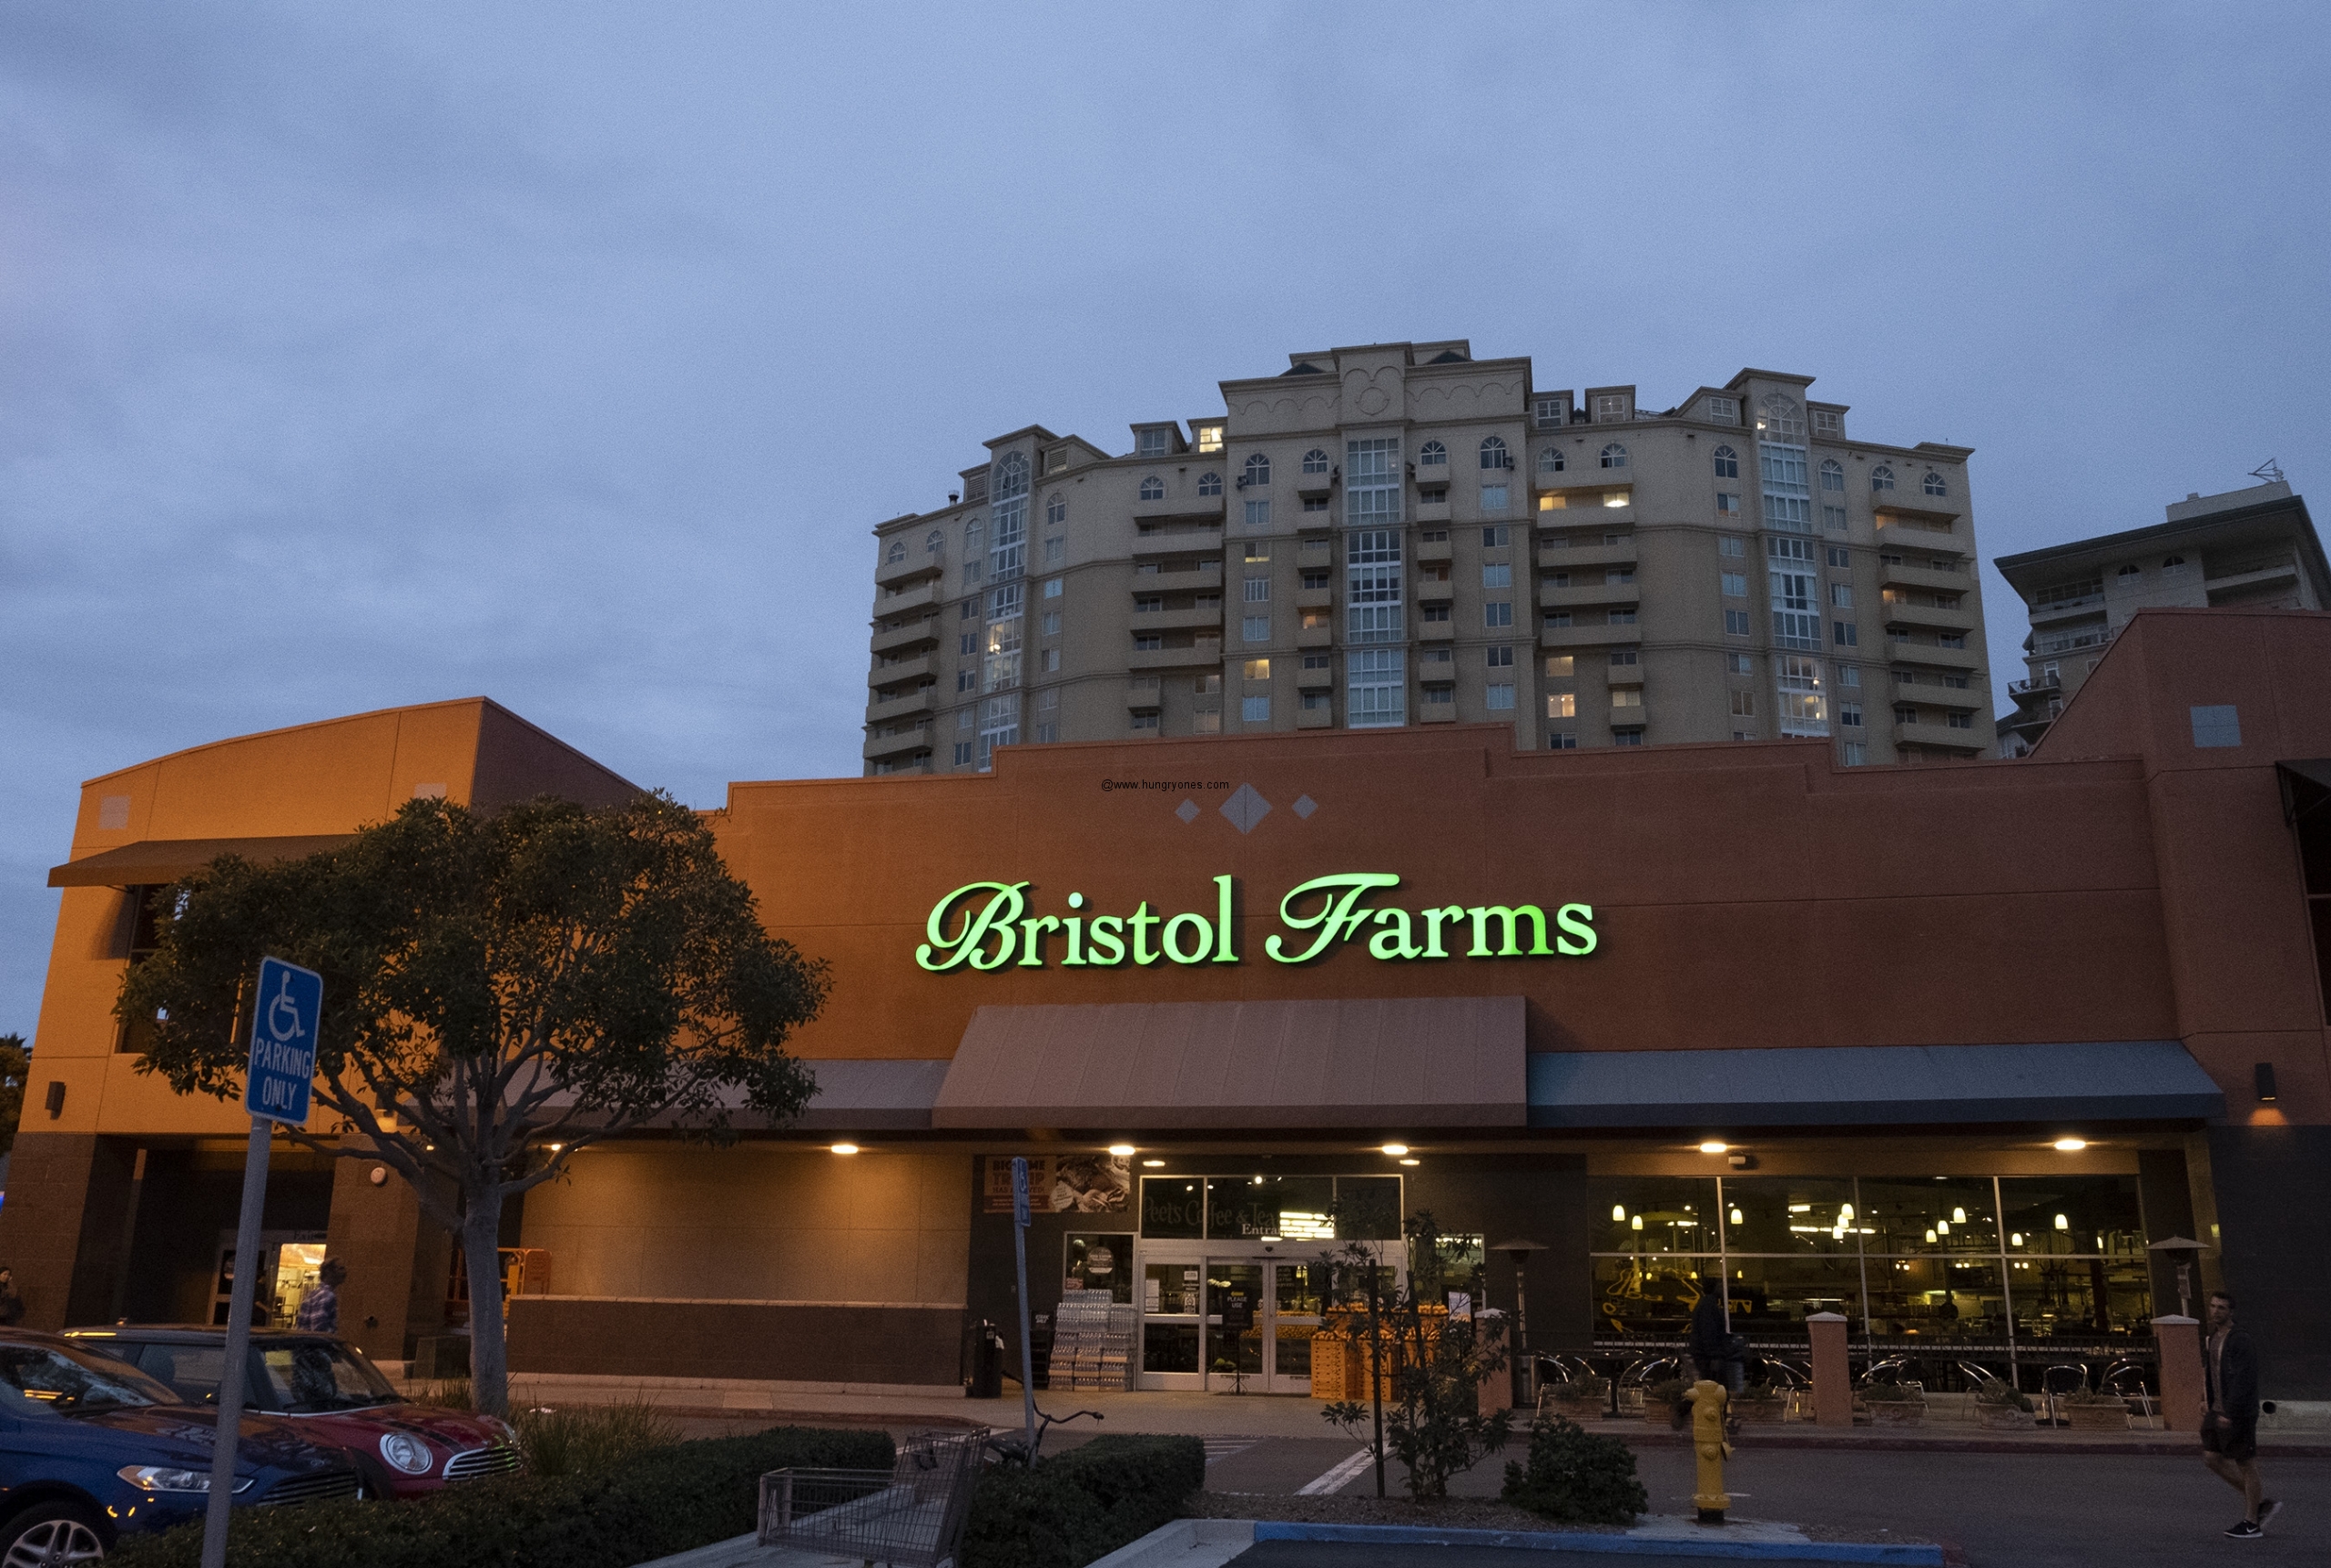 L.A.'s Best Fancy Grocery Store Is This Bristol Farms in the Valley